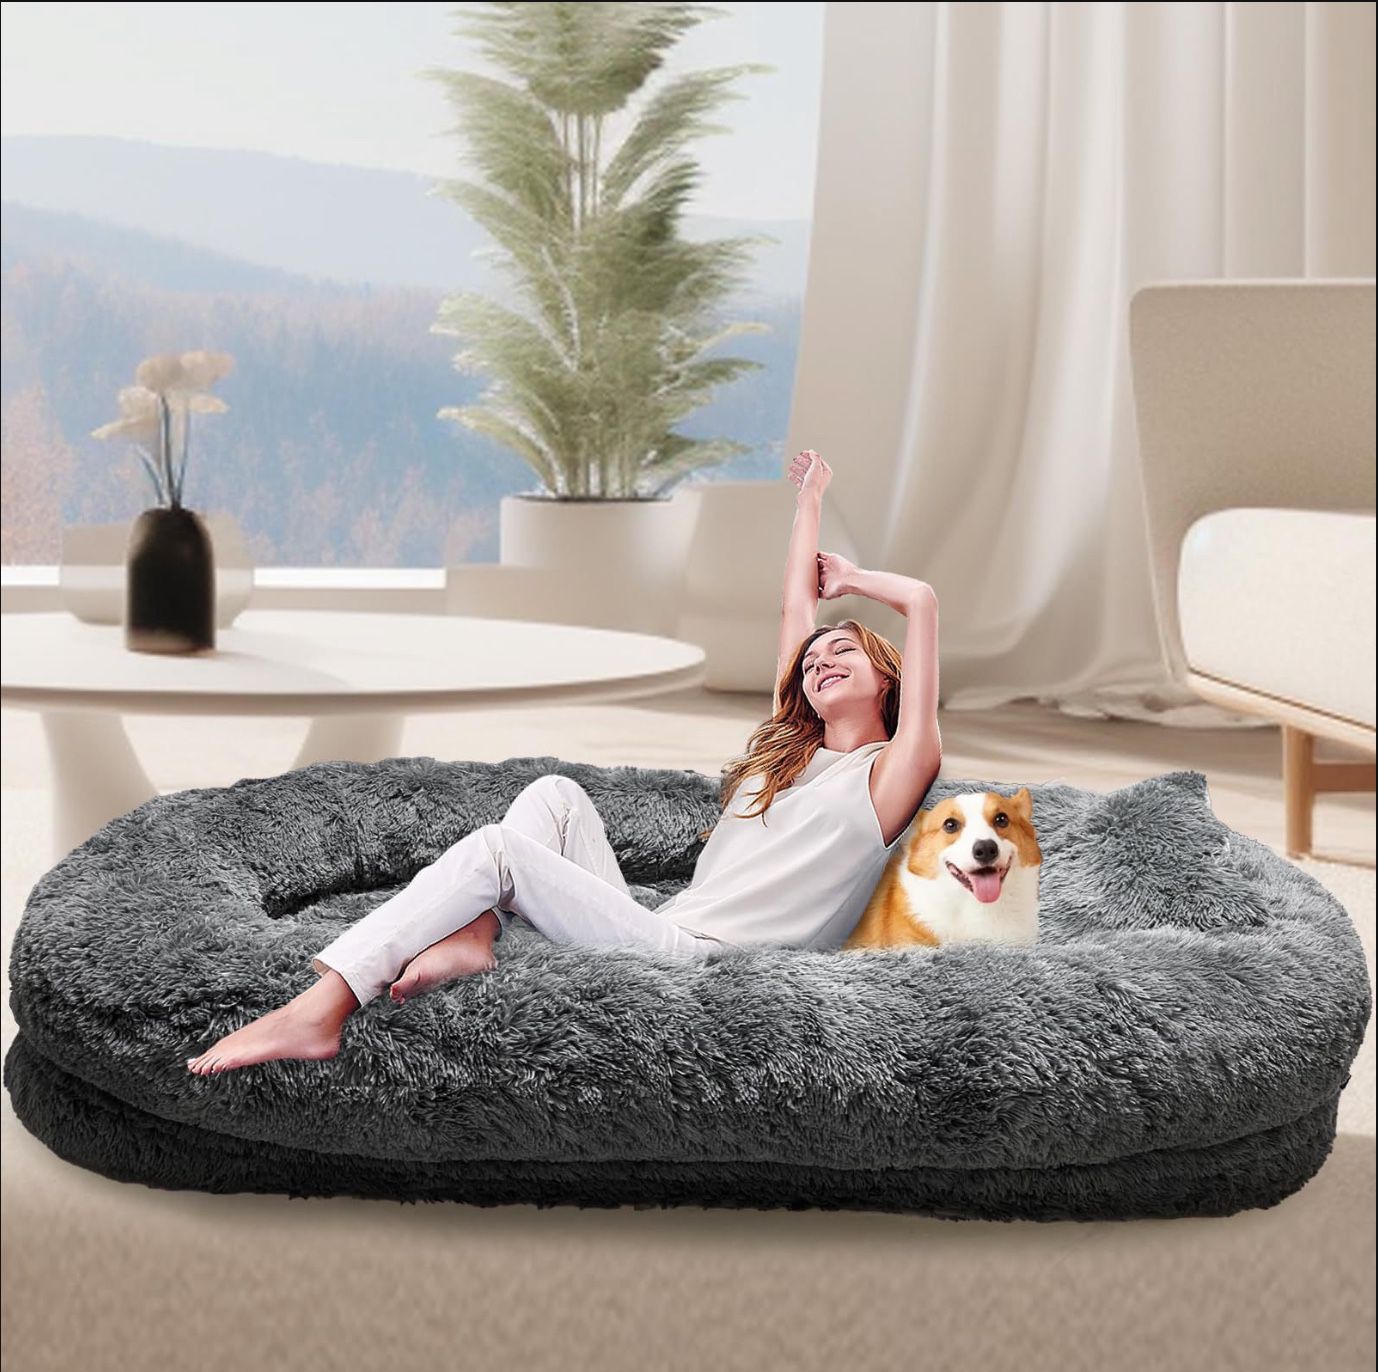 Brubro Large Human Dog Bed for Adult,74.8"x47.3"x13.8"